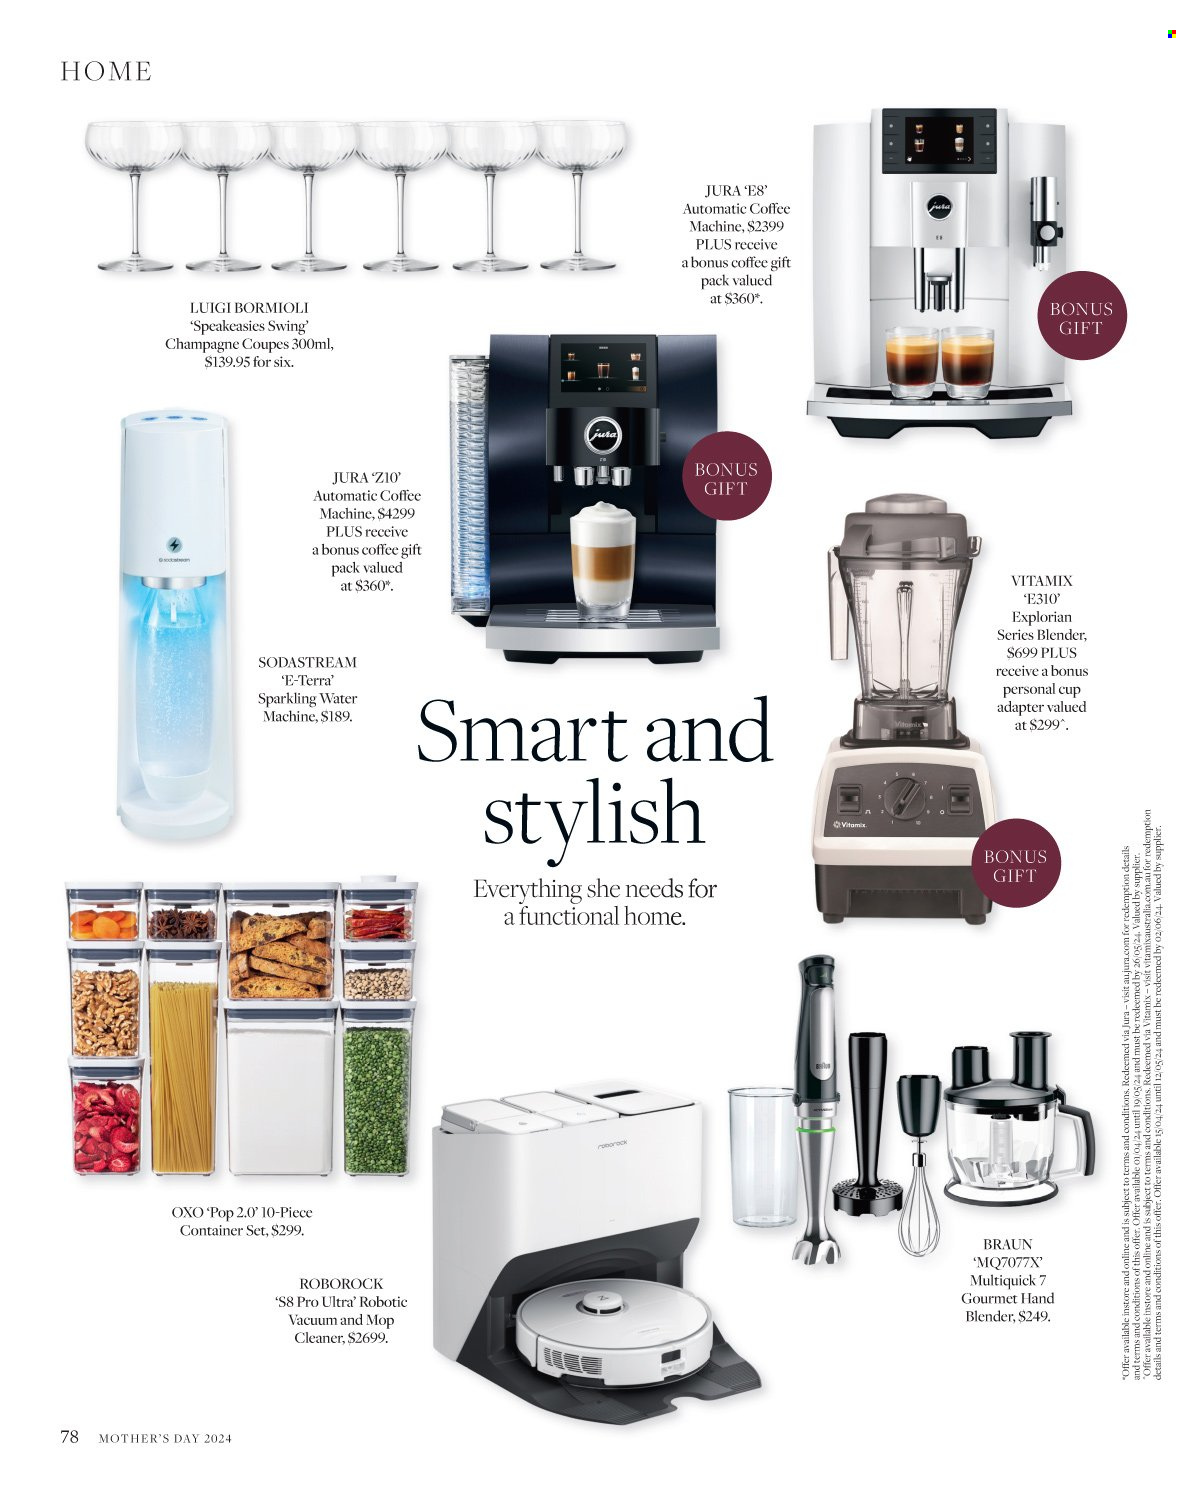 thumbnail - David Jones Catalogue - Sales products - gift set, water, sparkling wine, champagne, alcohol, mop, SodaStream, cup, container, storage container set, Braun, coffee machine, robot vacuum, hand blender. Page 78.